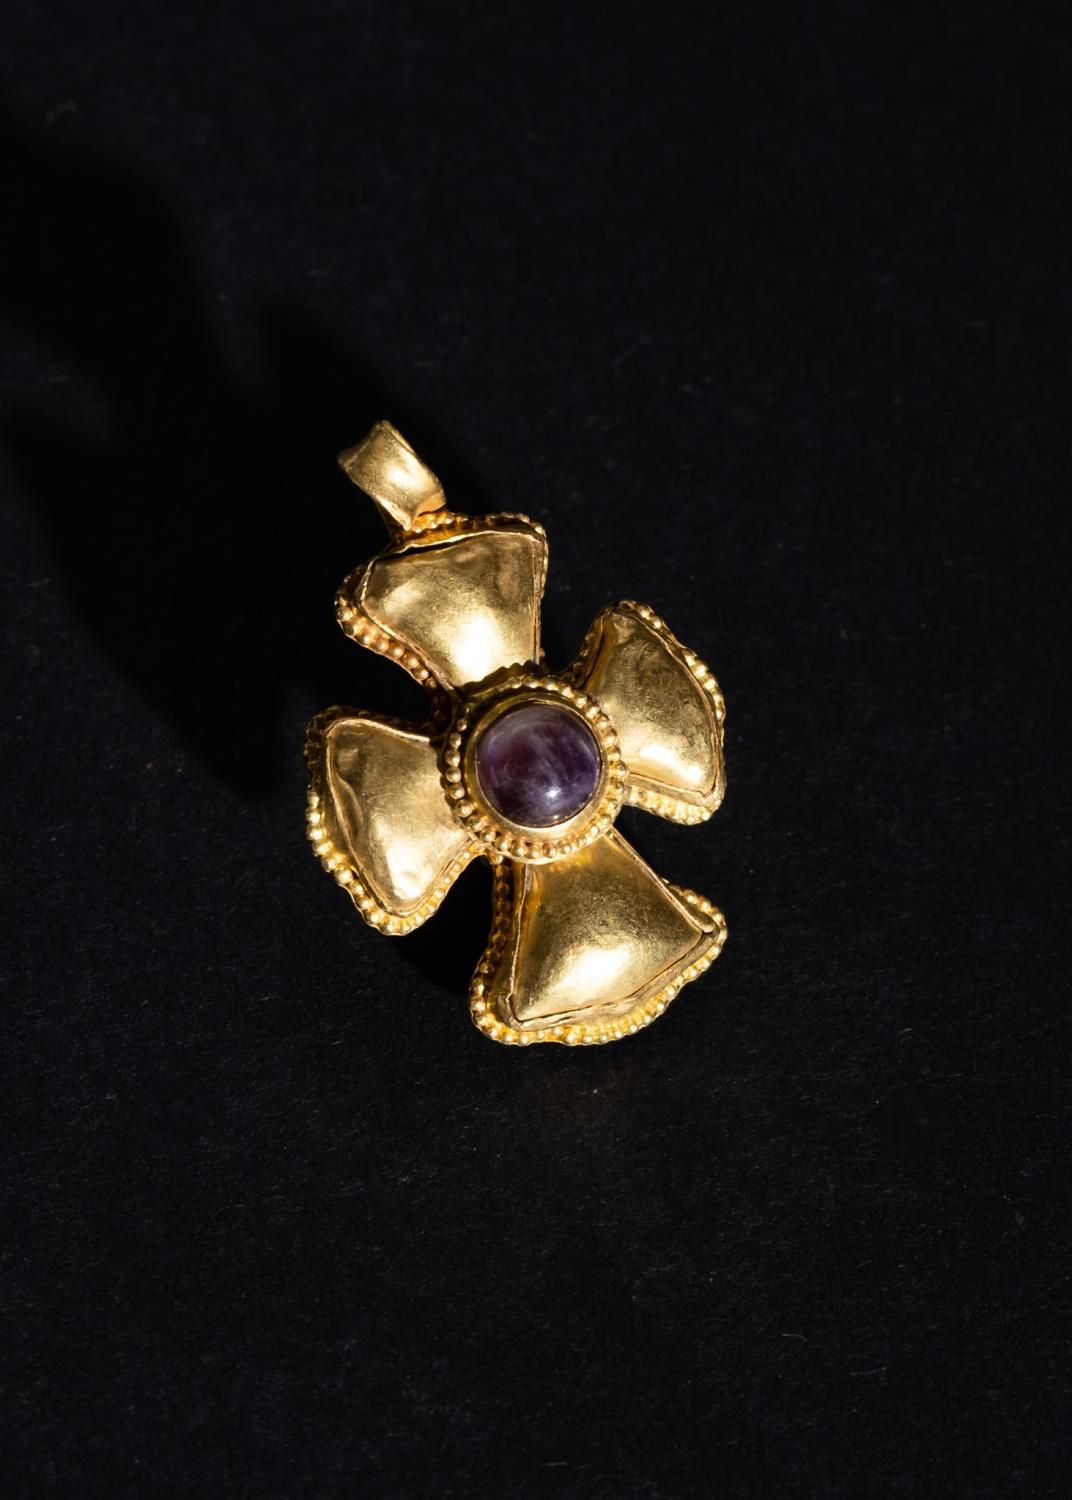 A GOLD BYZANTINE CROSS WITH AN AMETHYST CENTRE STONE, CIRCA 3RD-5TH CENTURY CROI&hellip;